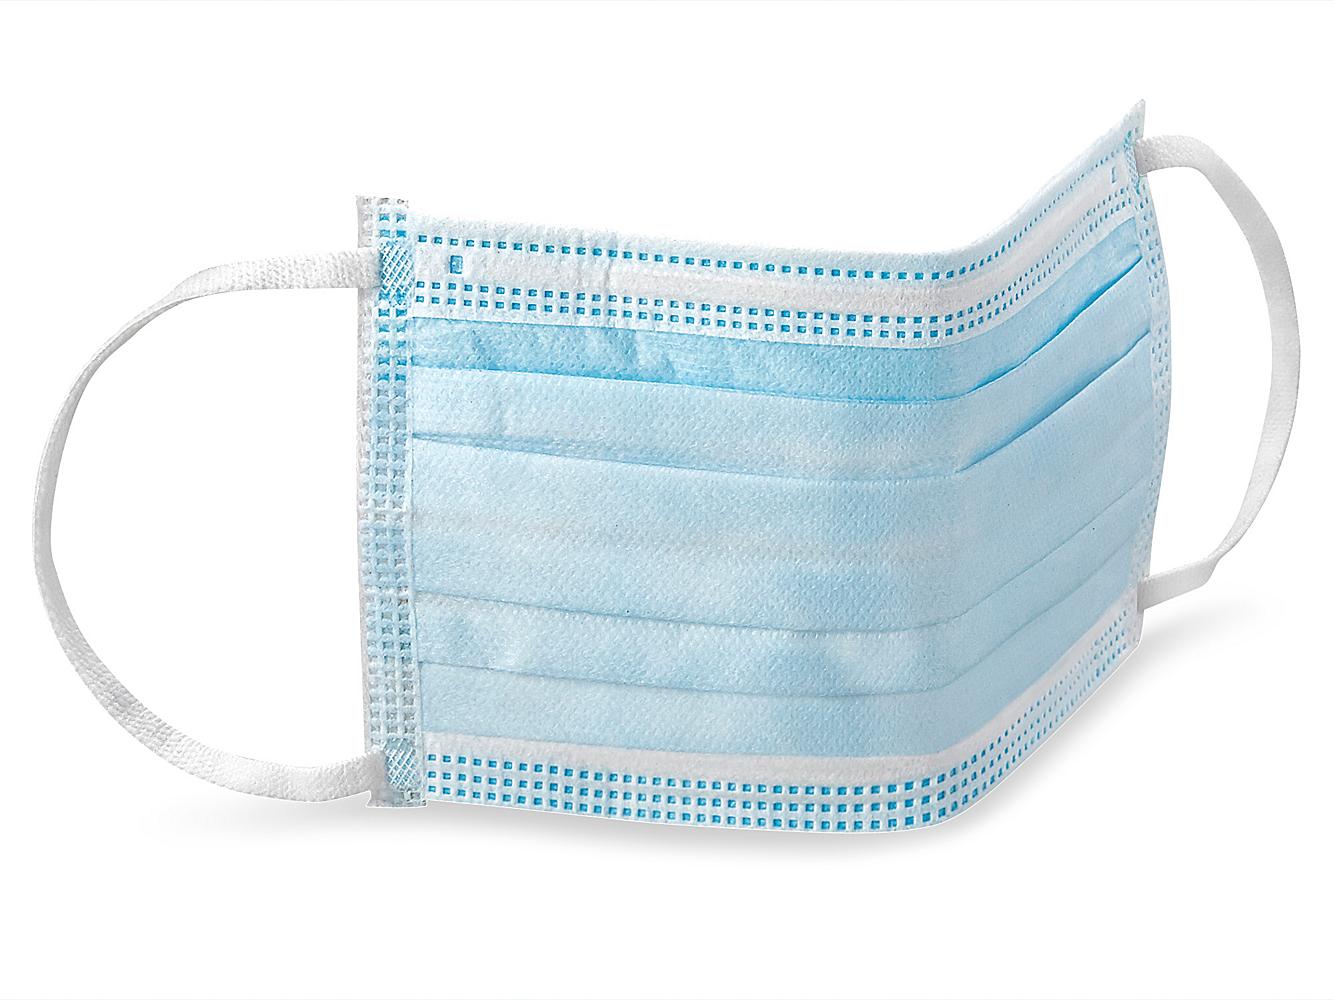 pin Norm houten Uline Deluxe Surgical Mask S-22137 - Uline